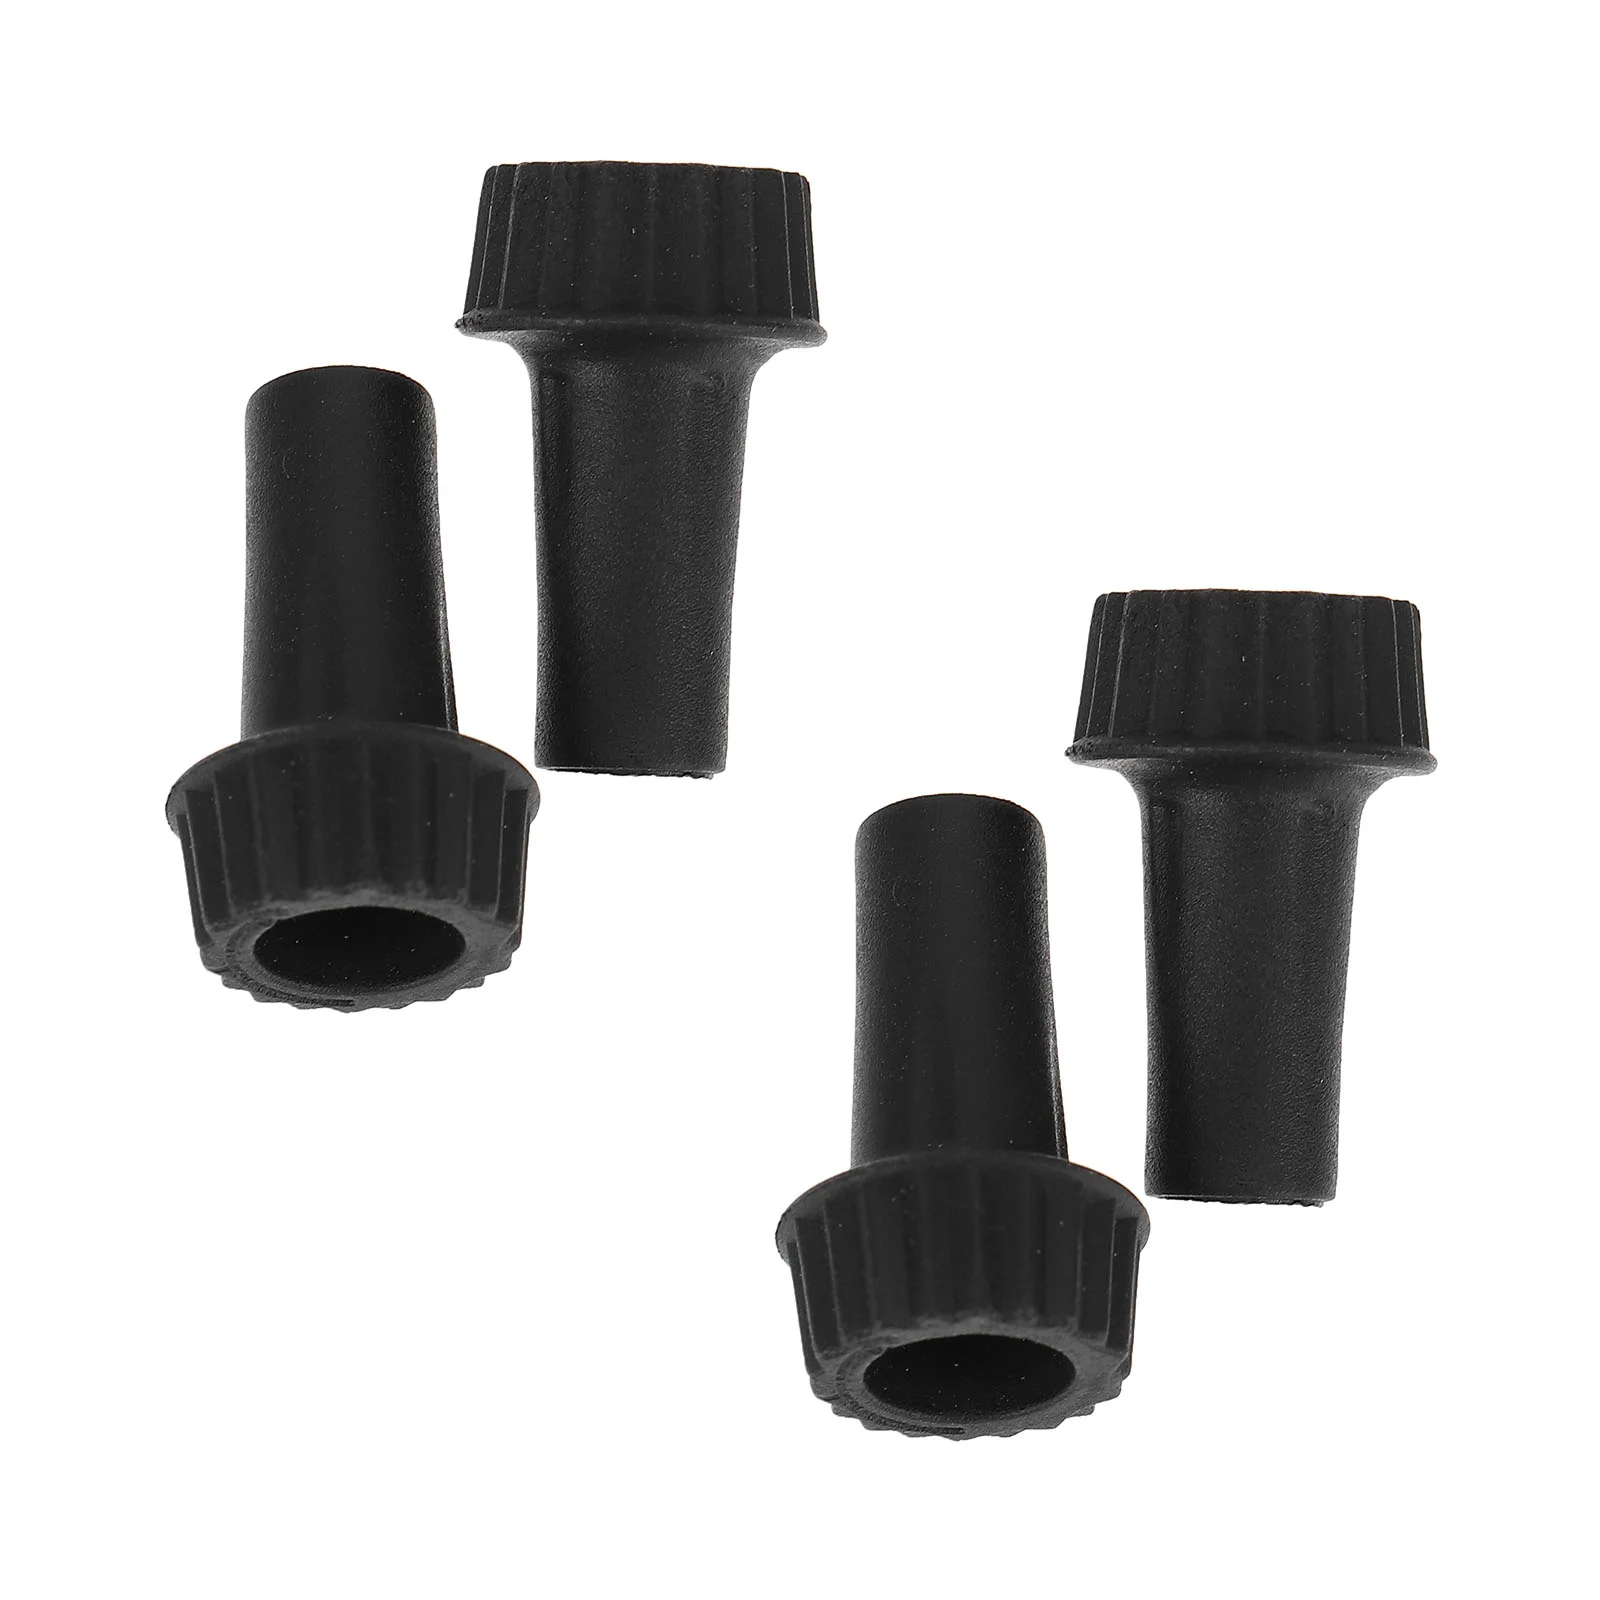 

4 Pcs Handle Plastic Socket Extension Knobs Light Replacement Accessories UL Twists Multicolor Home Supply Lamp Turn